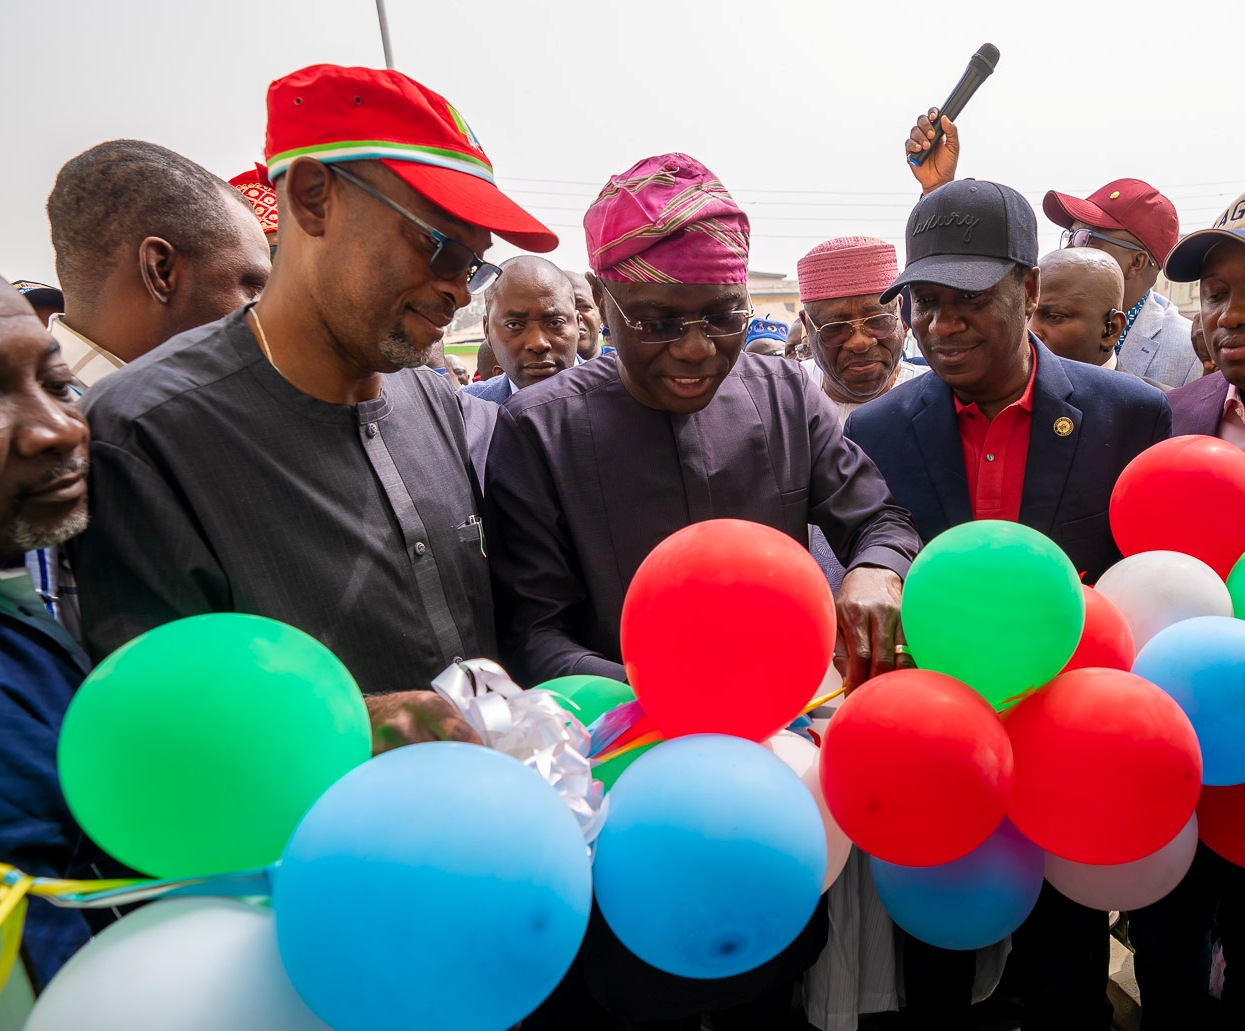 Lagos State Governor, Mr. Babajide Sanwo-Olu (middle), cutting the tape to commission the newly built CMS Primary Health Centre, flanked by Deputy Governor, Dr. Obafemi Hamzat (right) and Chairman, Bariga LCDA, Hon. Alabi Kolade (left) in Bariga, on Friday, February 14, 2020.